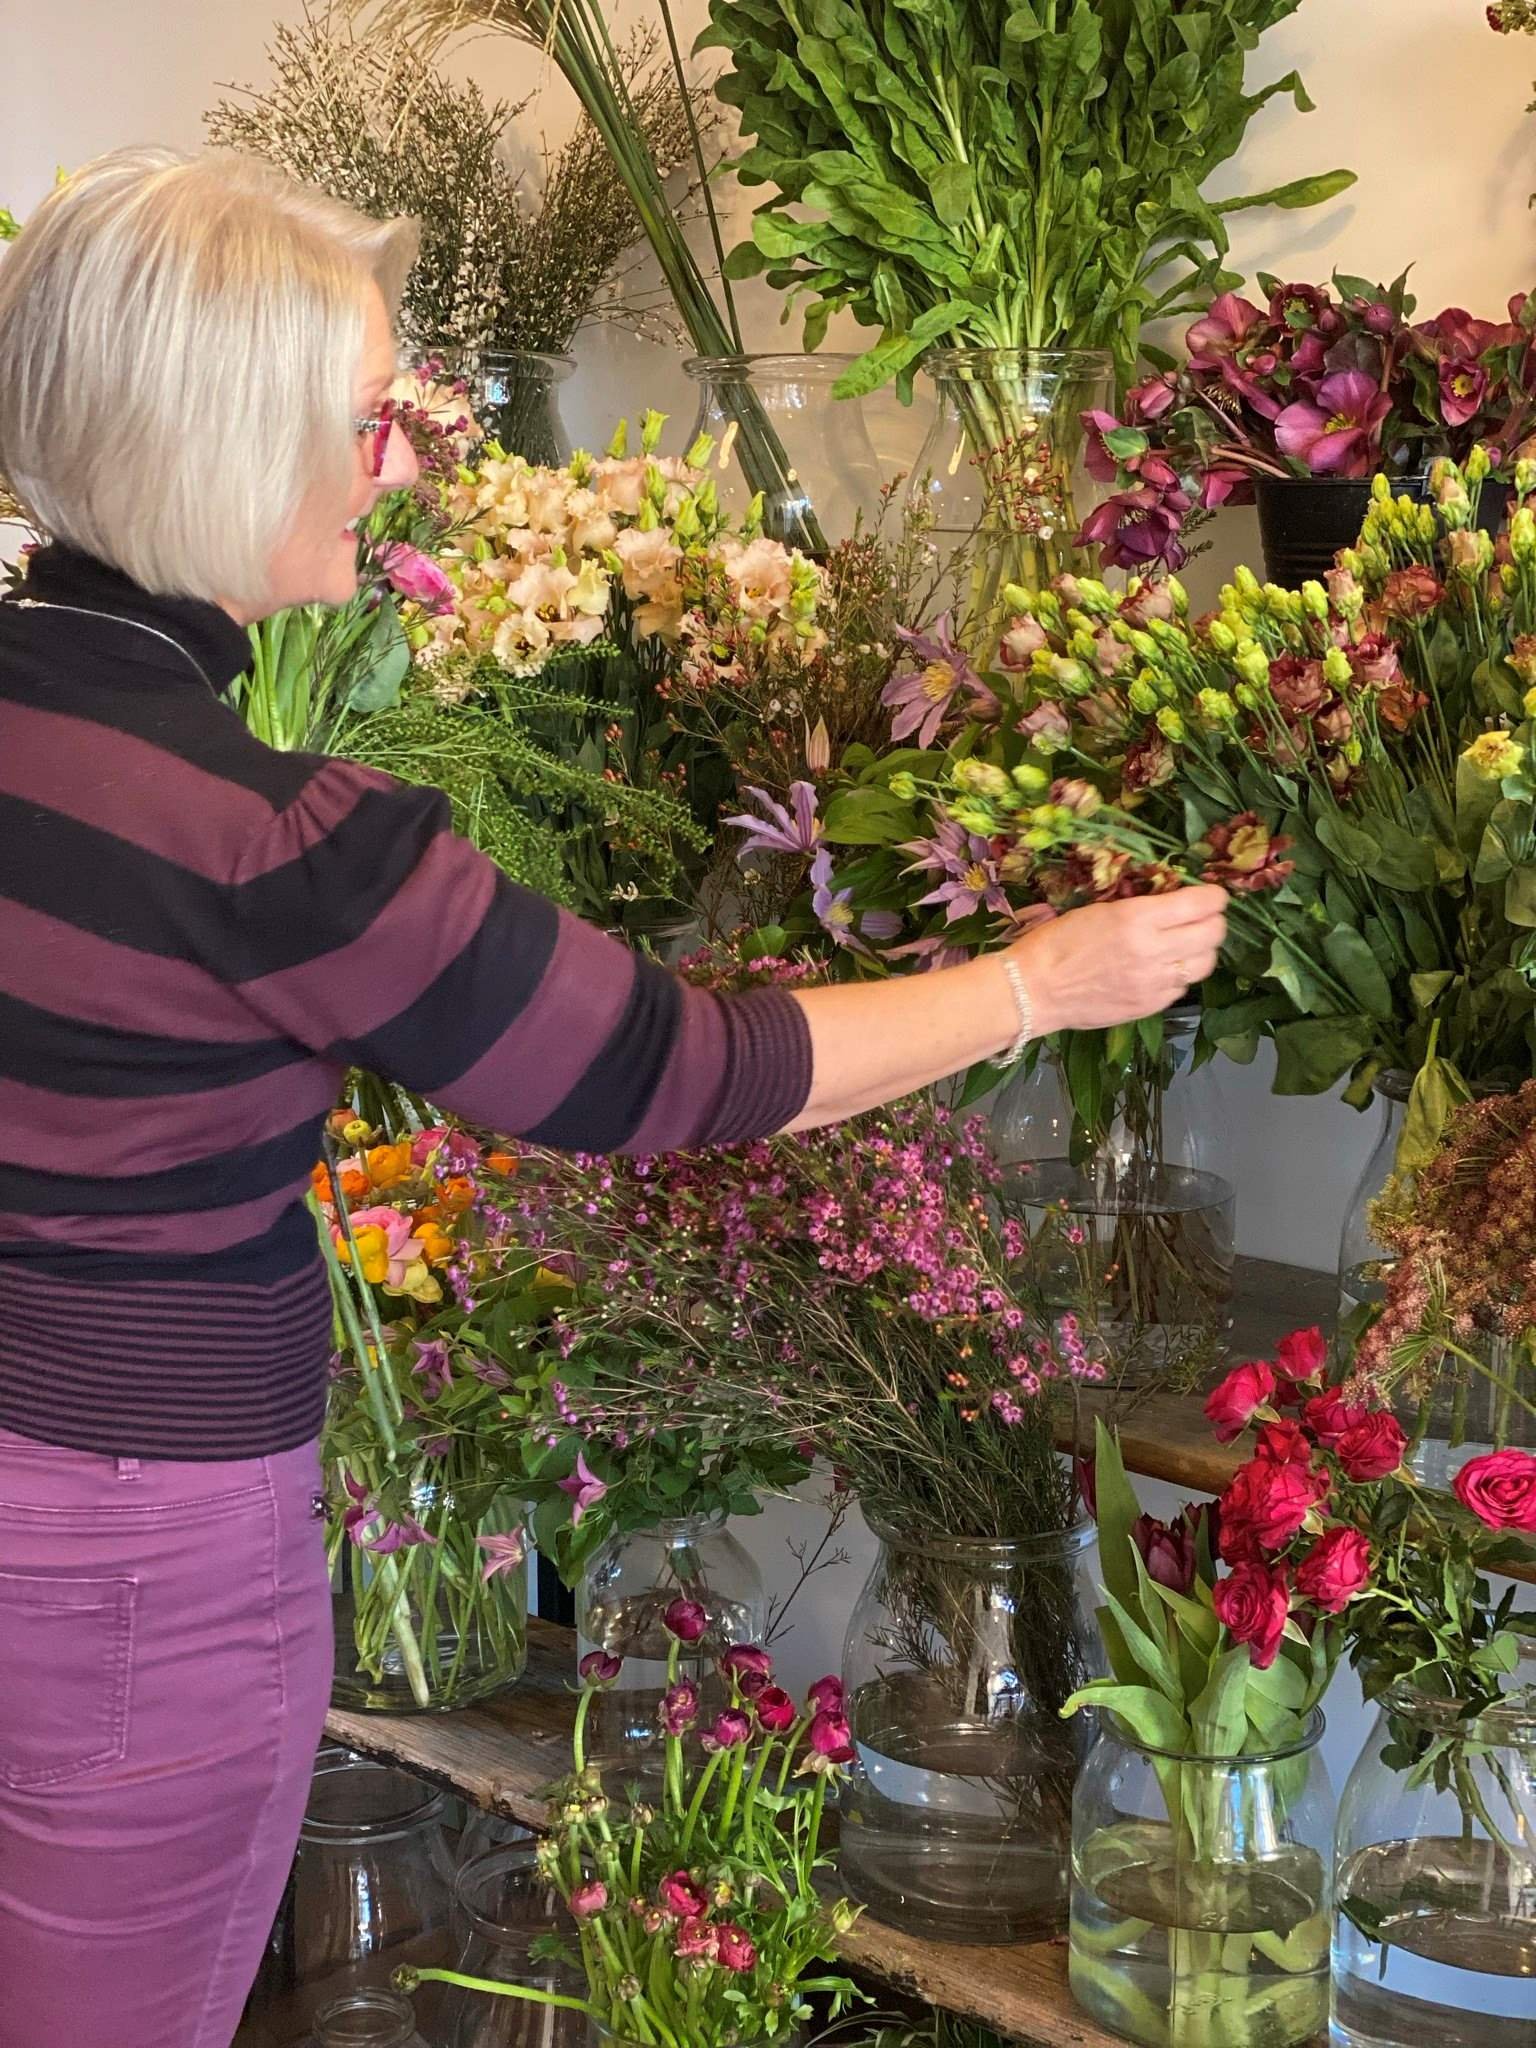 A floristry student selecting flowers from the floristry basics flower stand